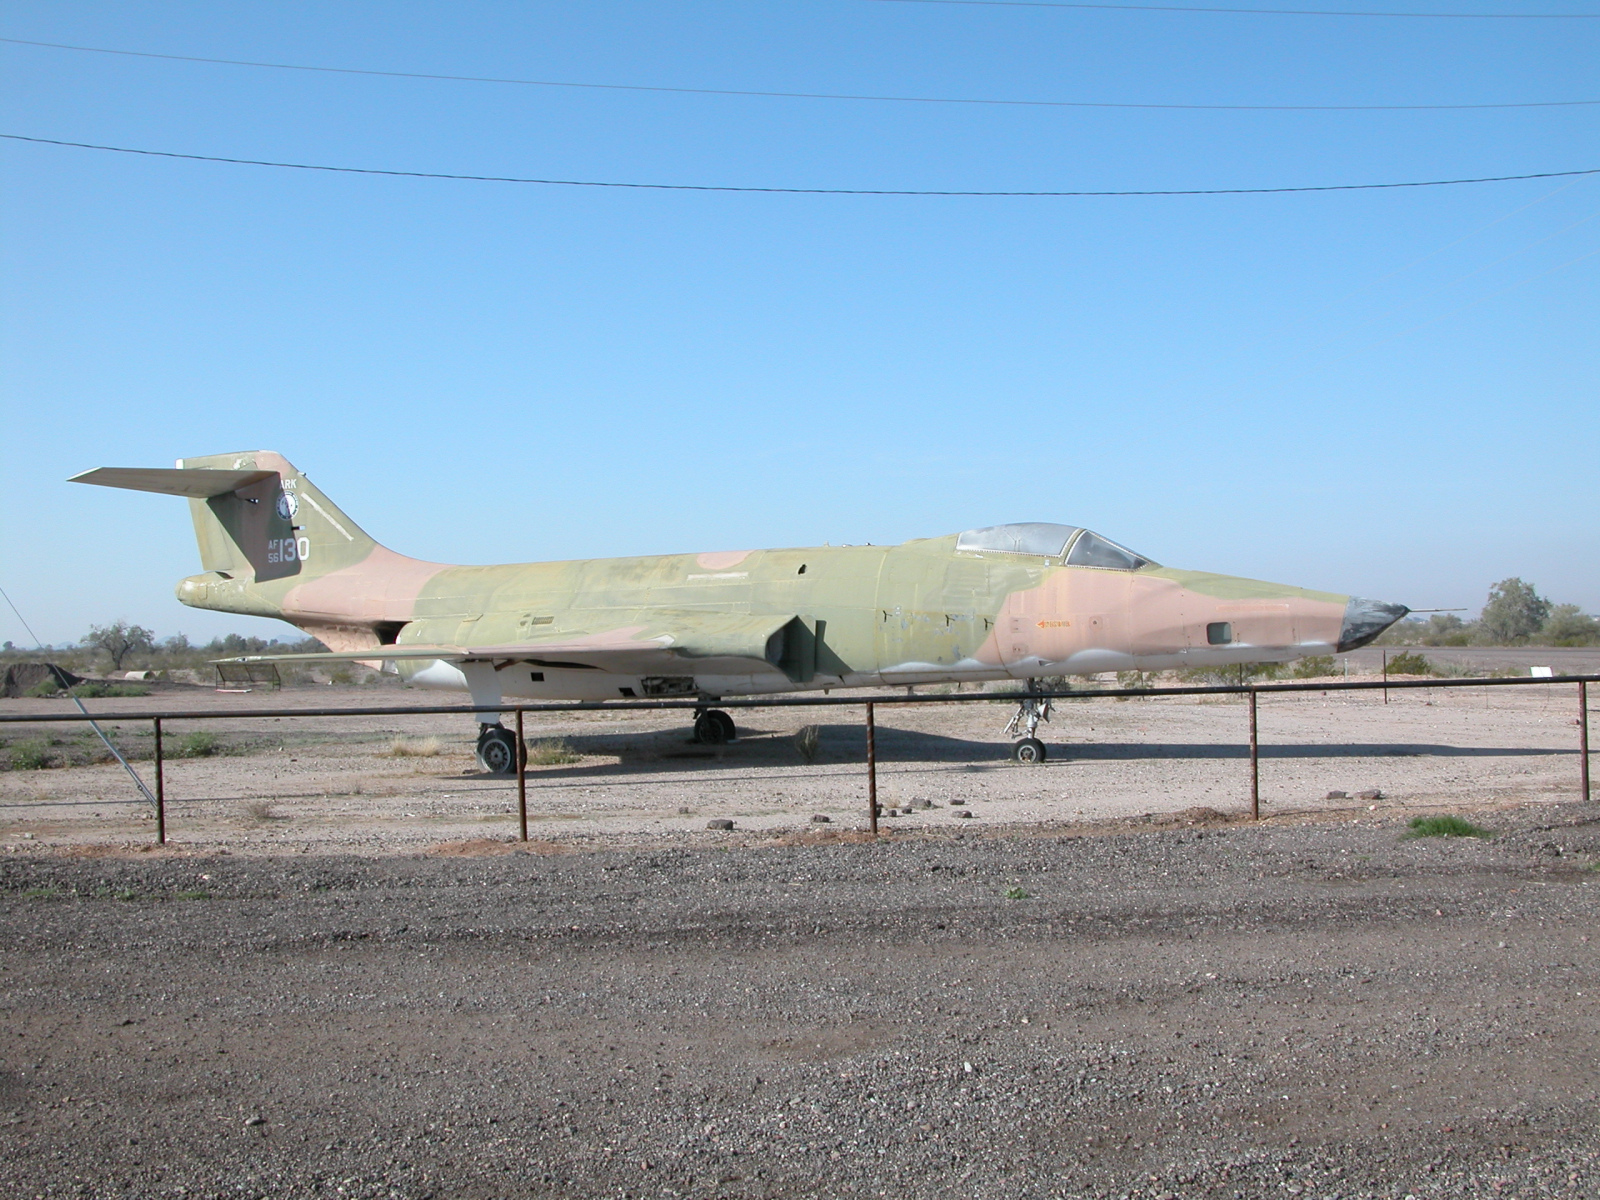 RF-101C 56-0130 at Gila Bend airfield